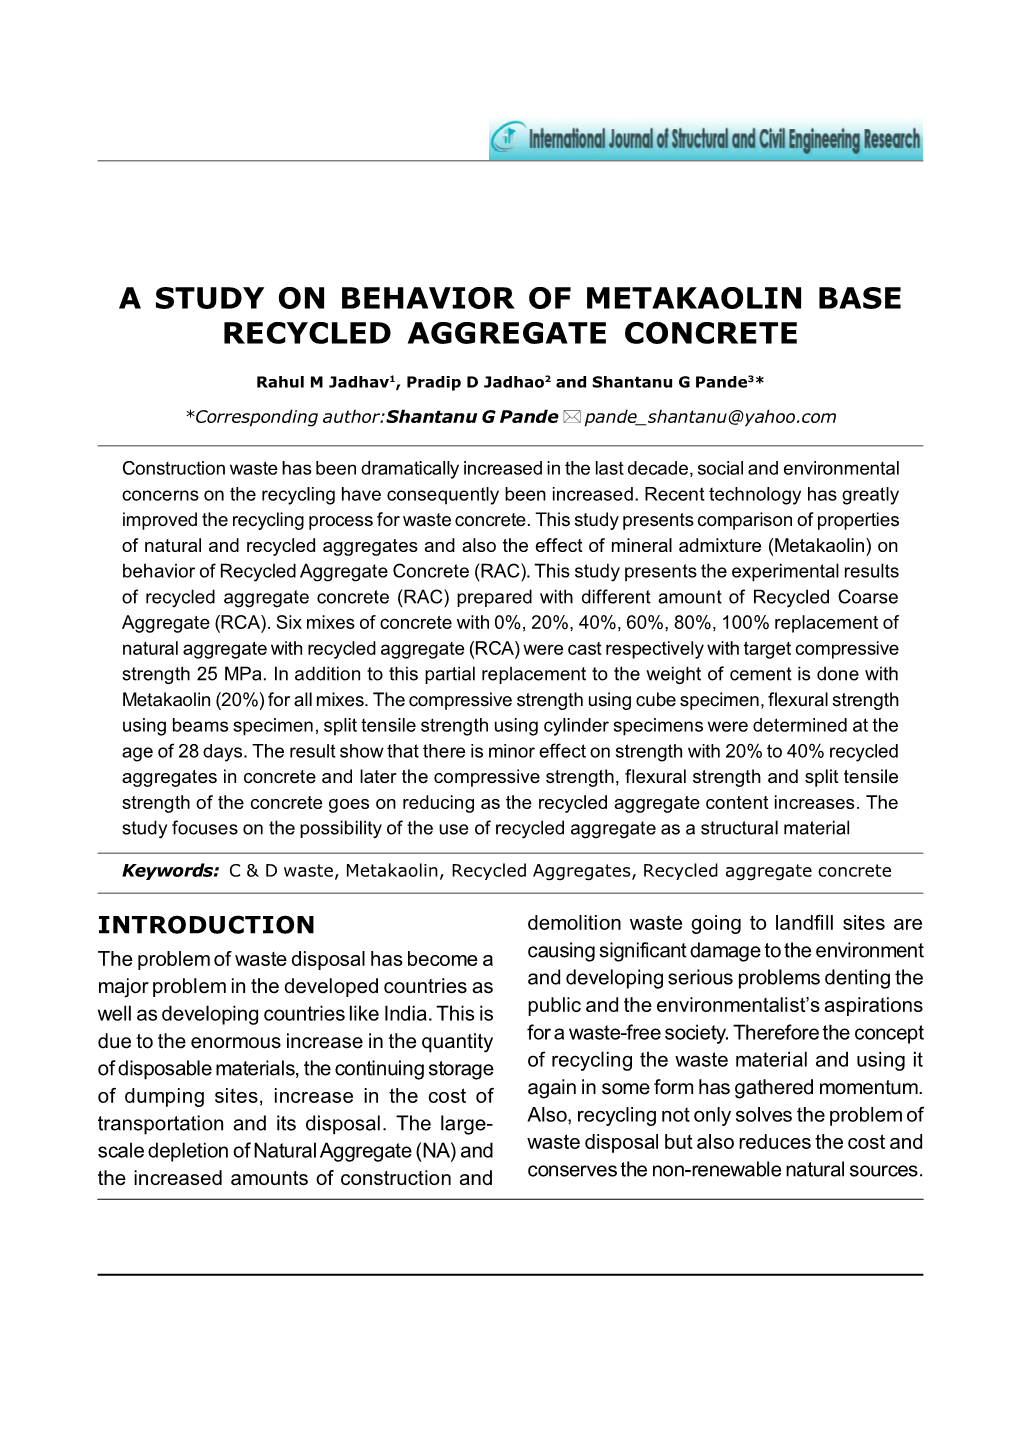 A Study on Behavior of Metakaolin Base Recycled Aggregate Concrete